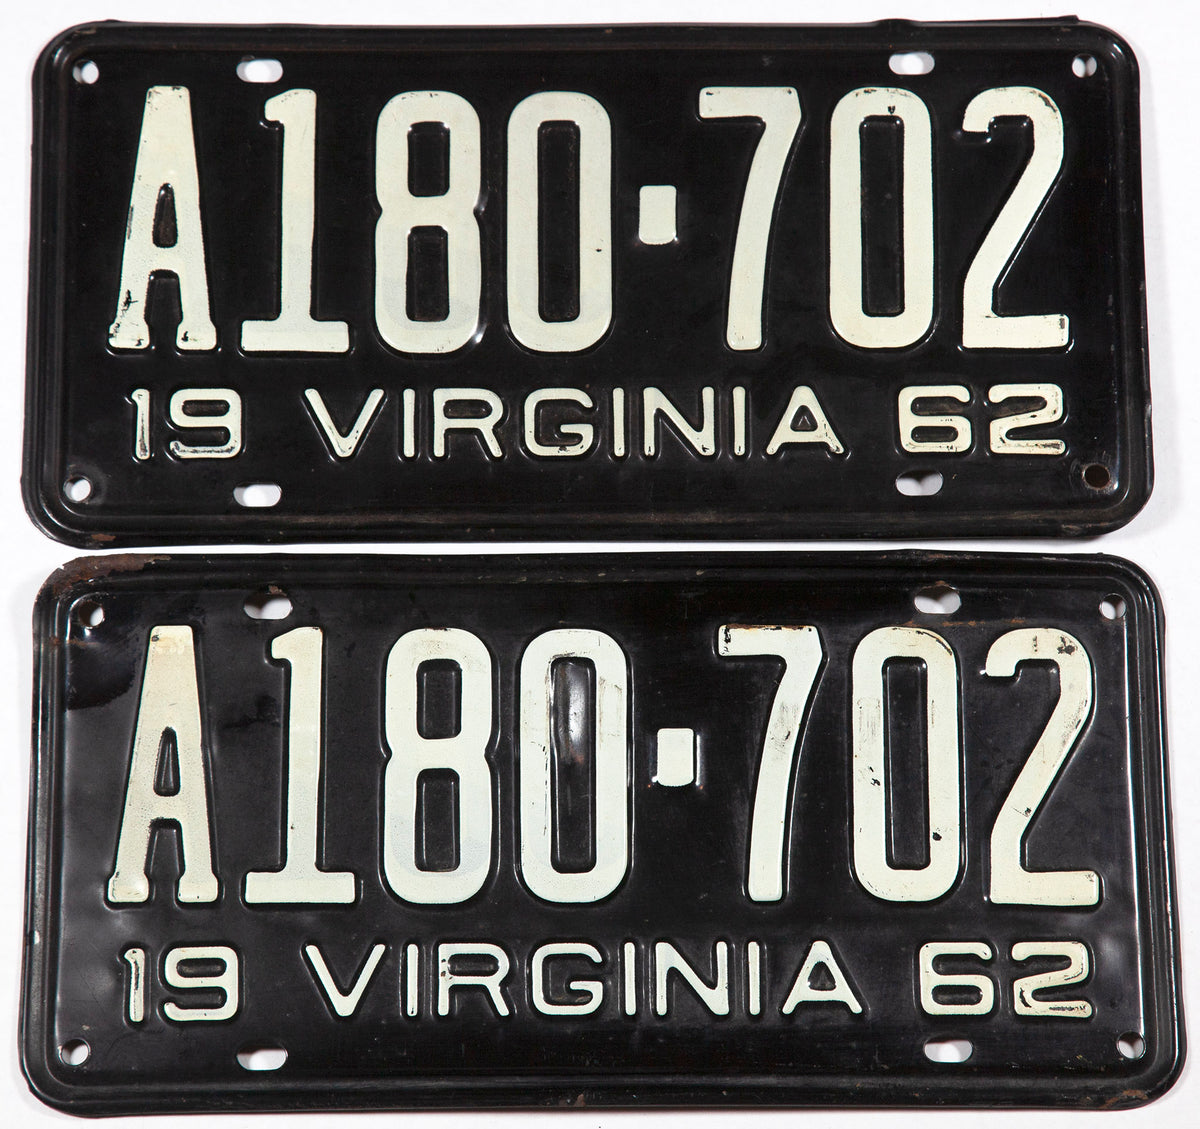 1962 Virginia license plates grading very good plus with some bends